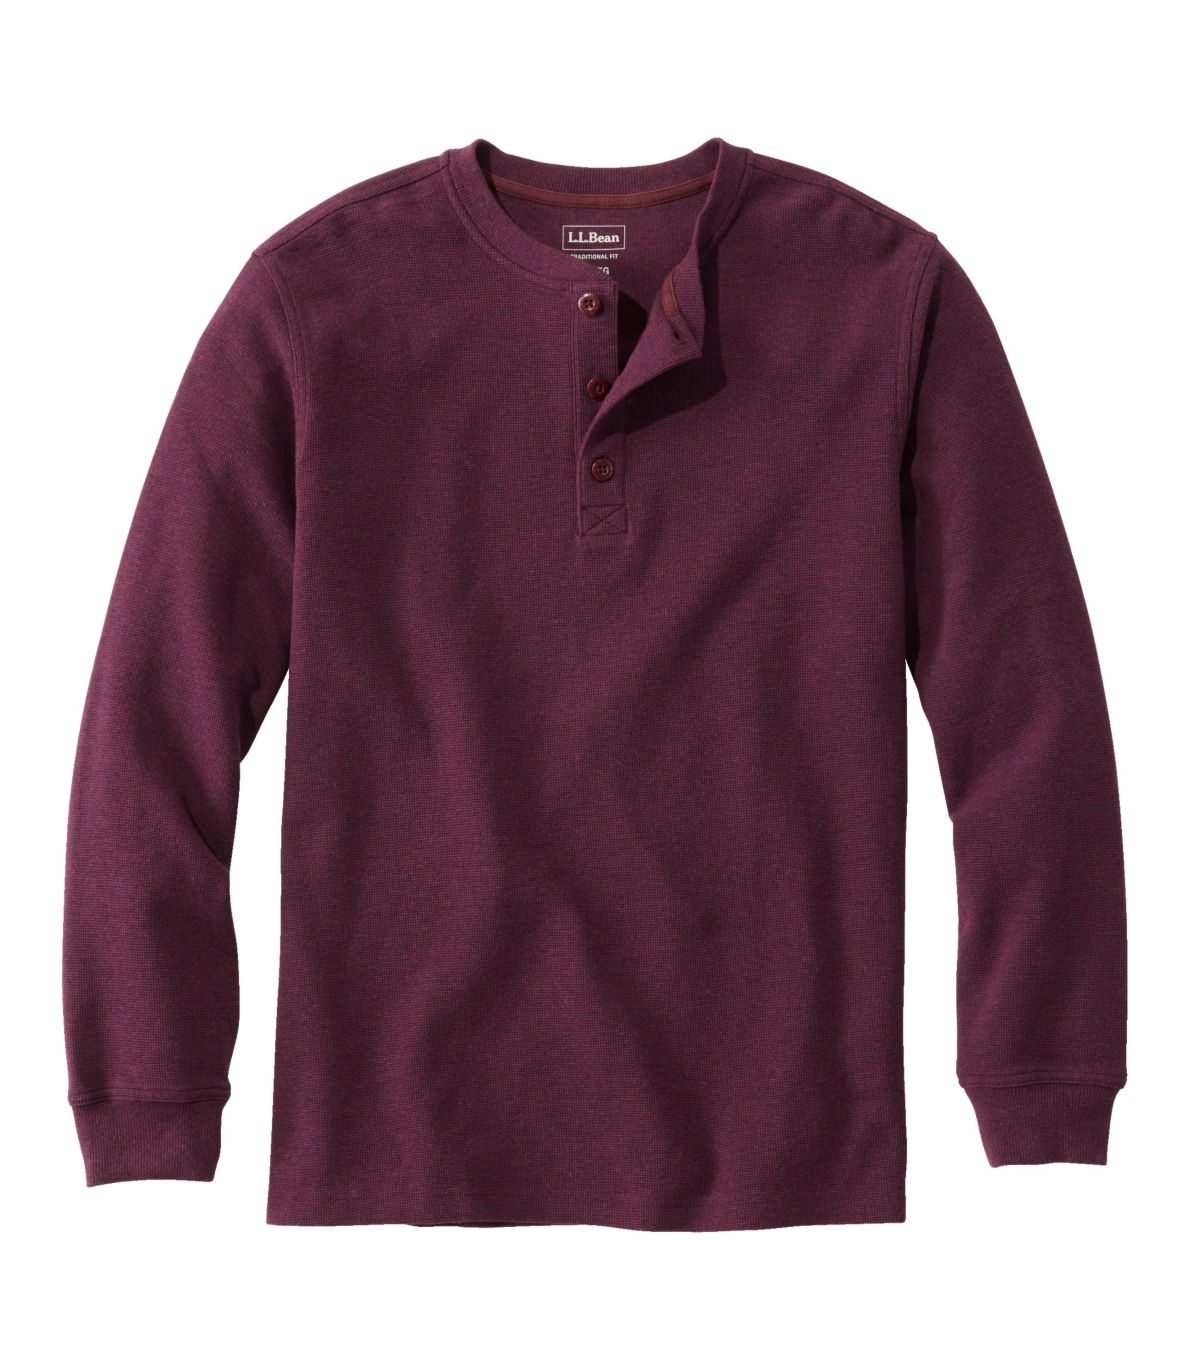 Men's Unshrinkable Mini-Waffle Henley, Long-Sleeve Traditional Fit